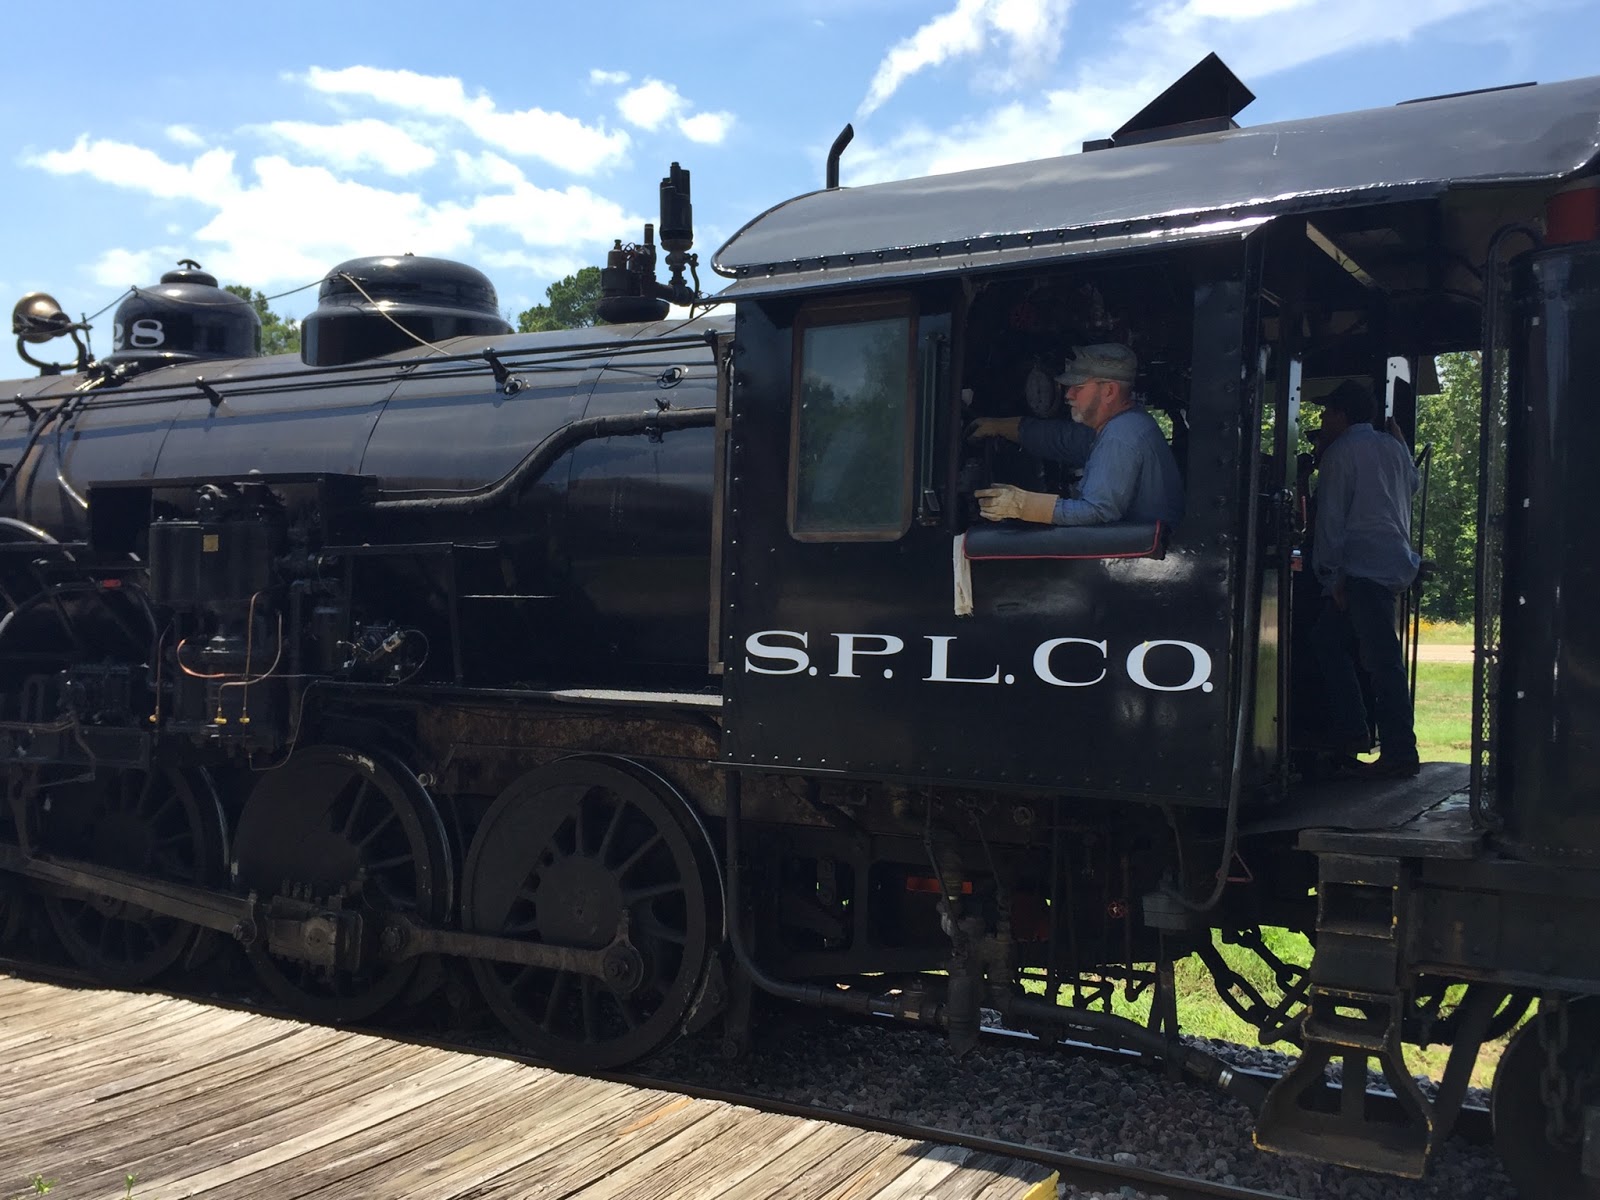 Hey Texas, Have You Ridden YOUR Railroad Lately? | Newswire